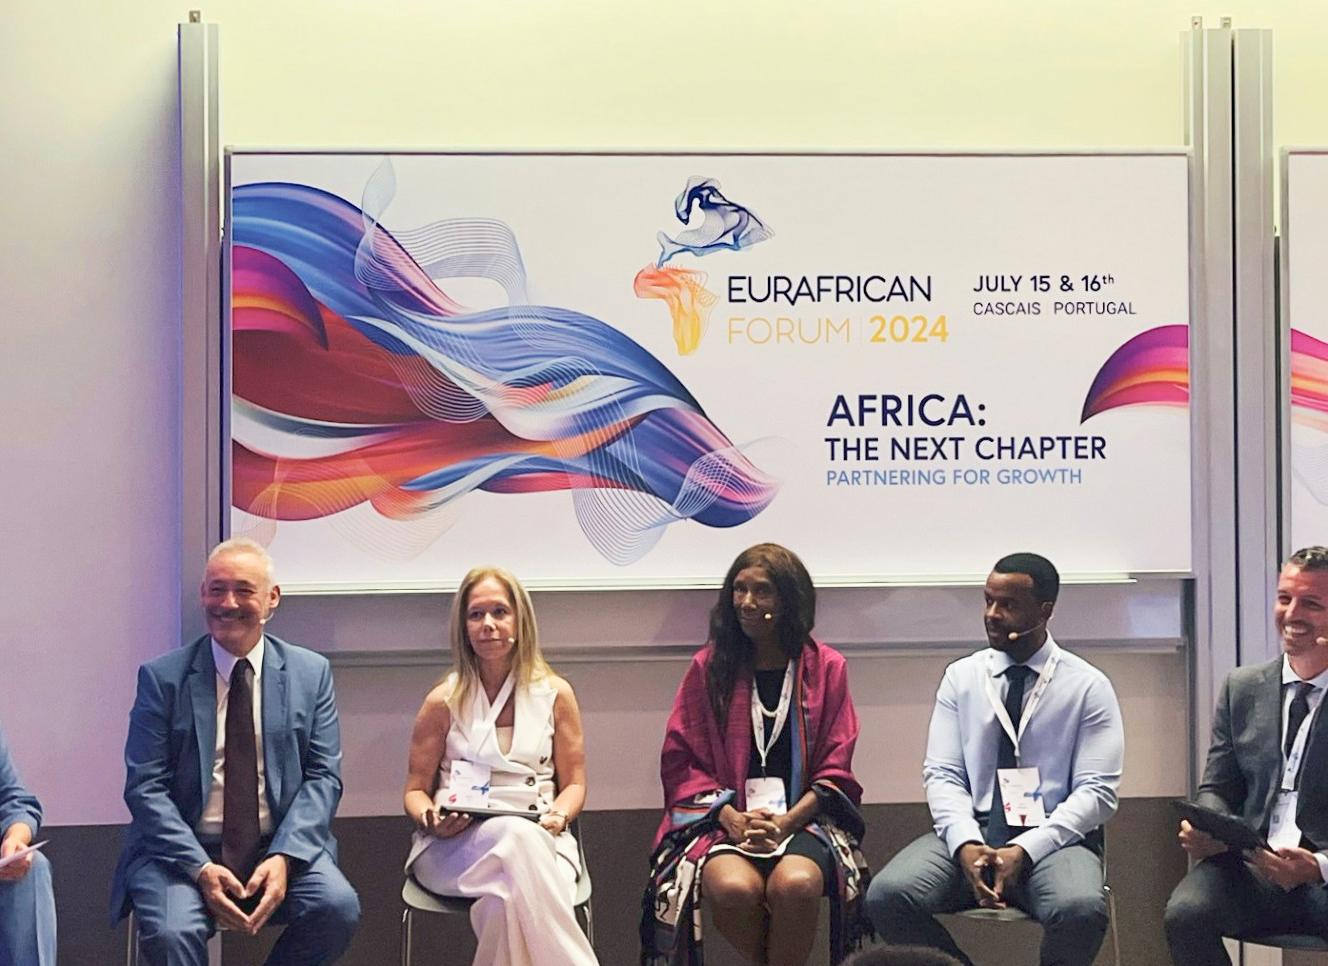 Isabel Capeloa Gil takes part in the 7th edition of the EurAfrican Forum 2024